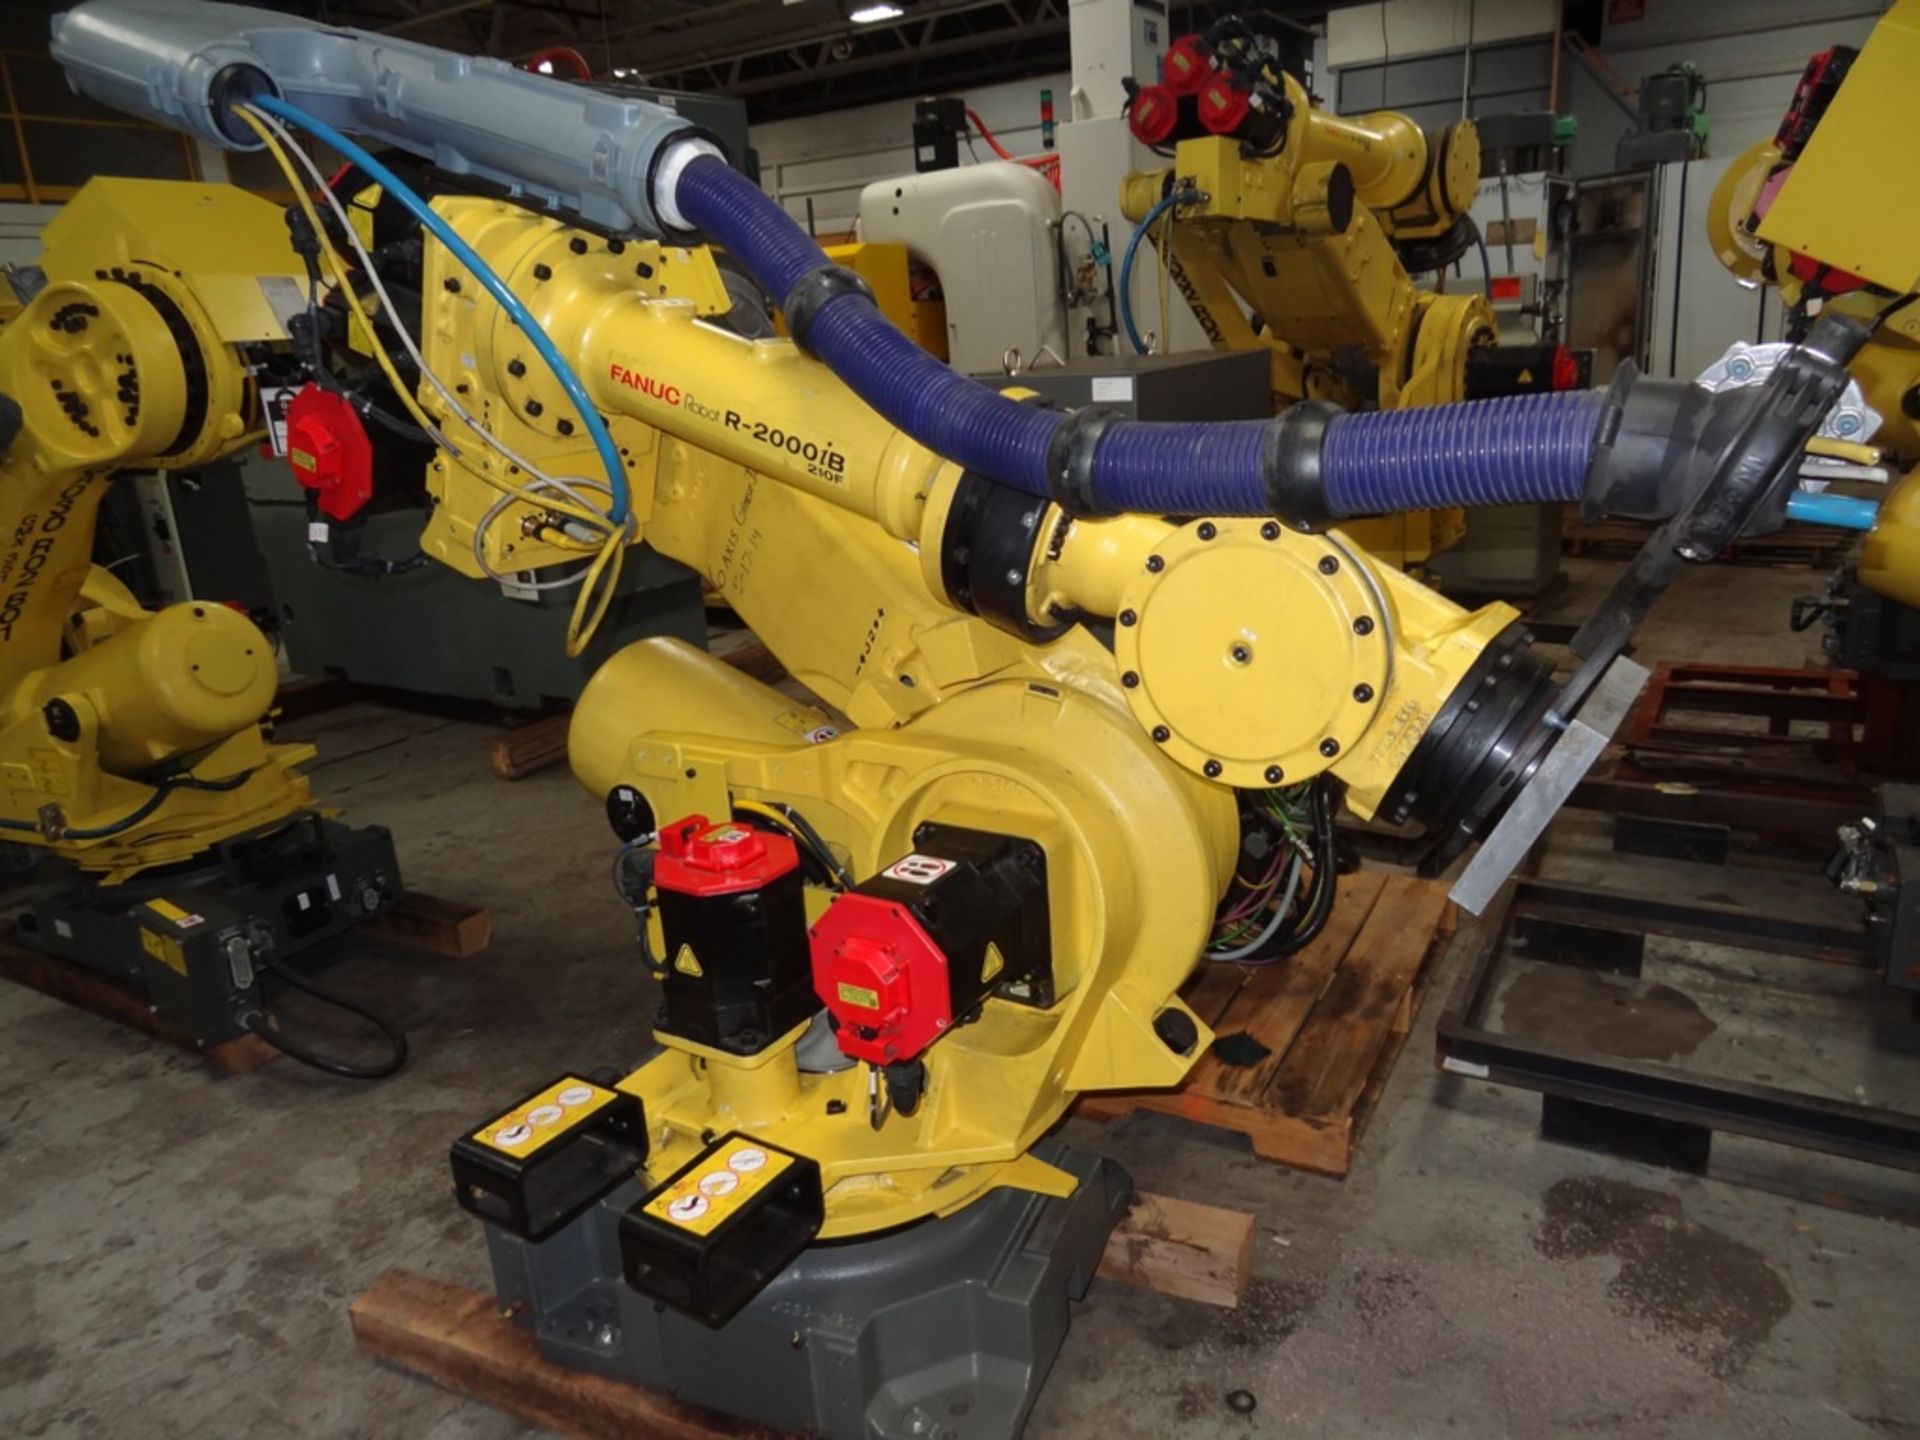 FANUC R2000iB/210F WITH R-30iA, CABLES, COLOR TEACH PEND, SN 127365, YEAR, HOURS 6841, LOCATION MI - Image 4 of 11